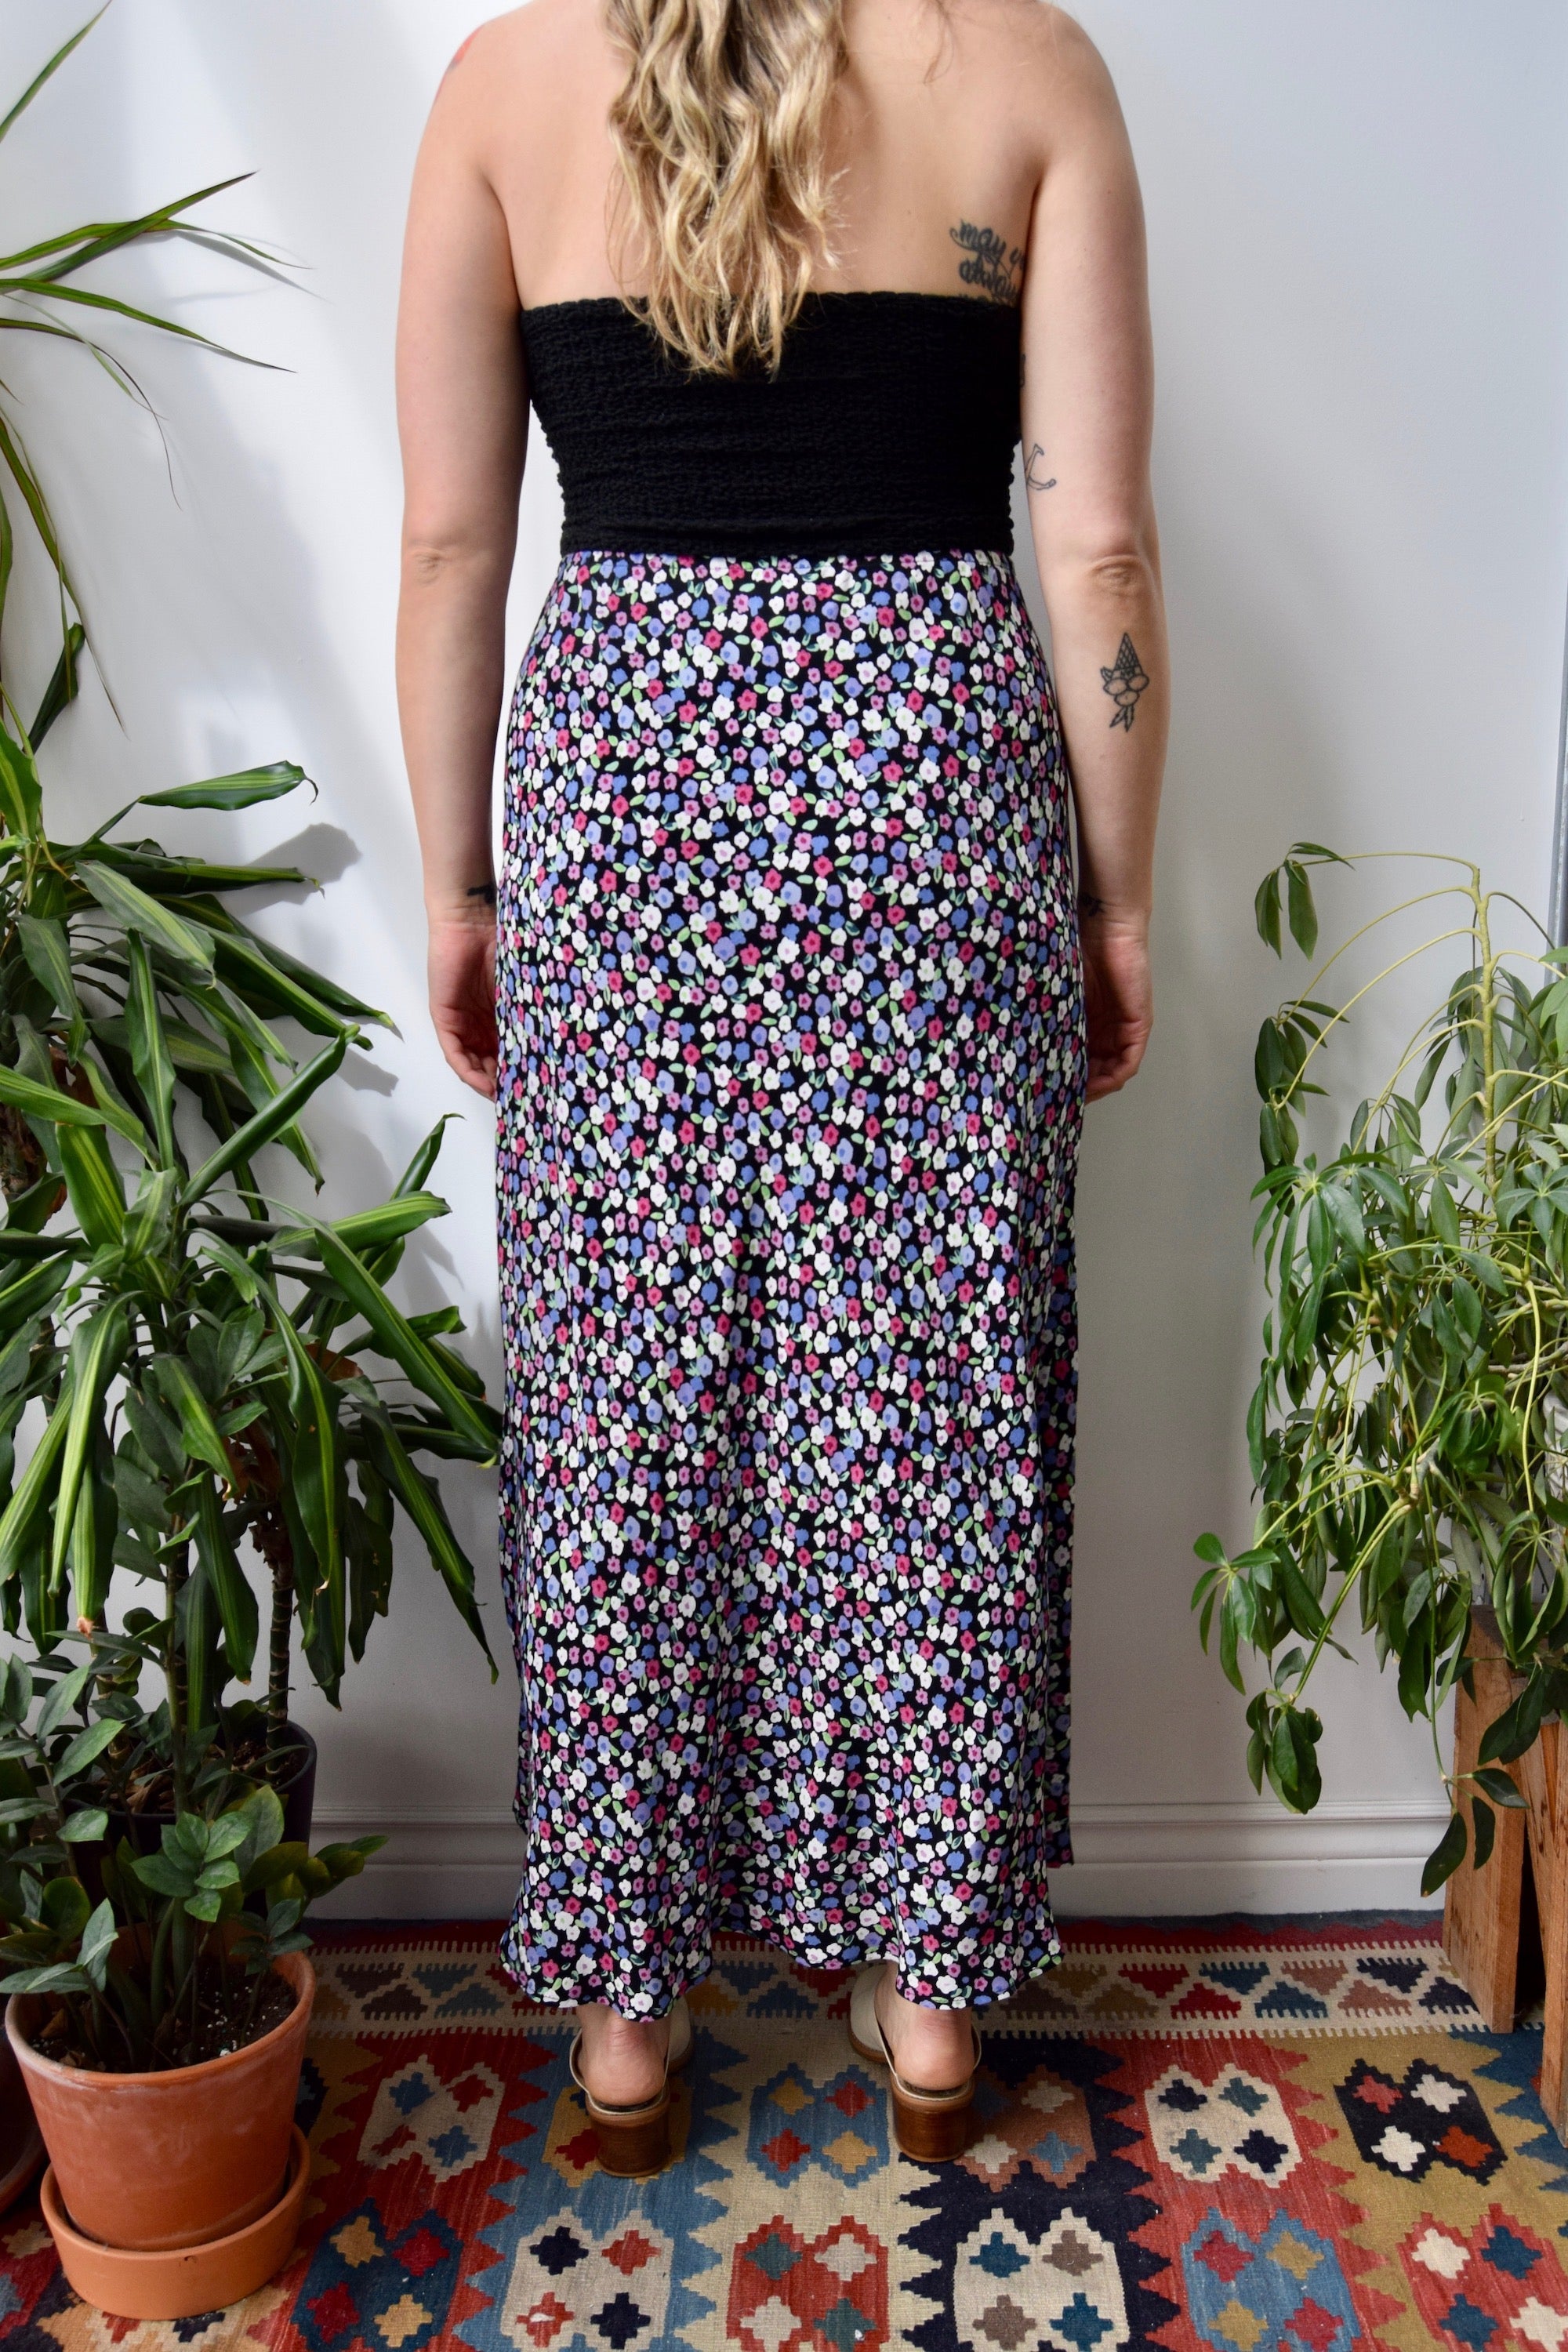 Floral Aughts Skirt